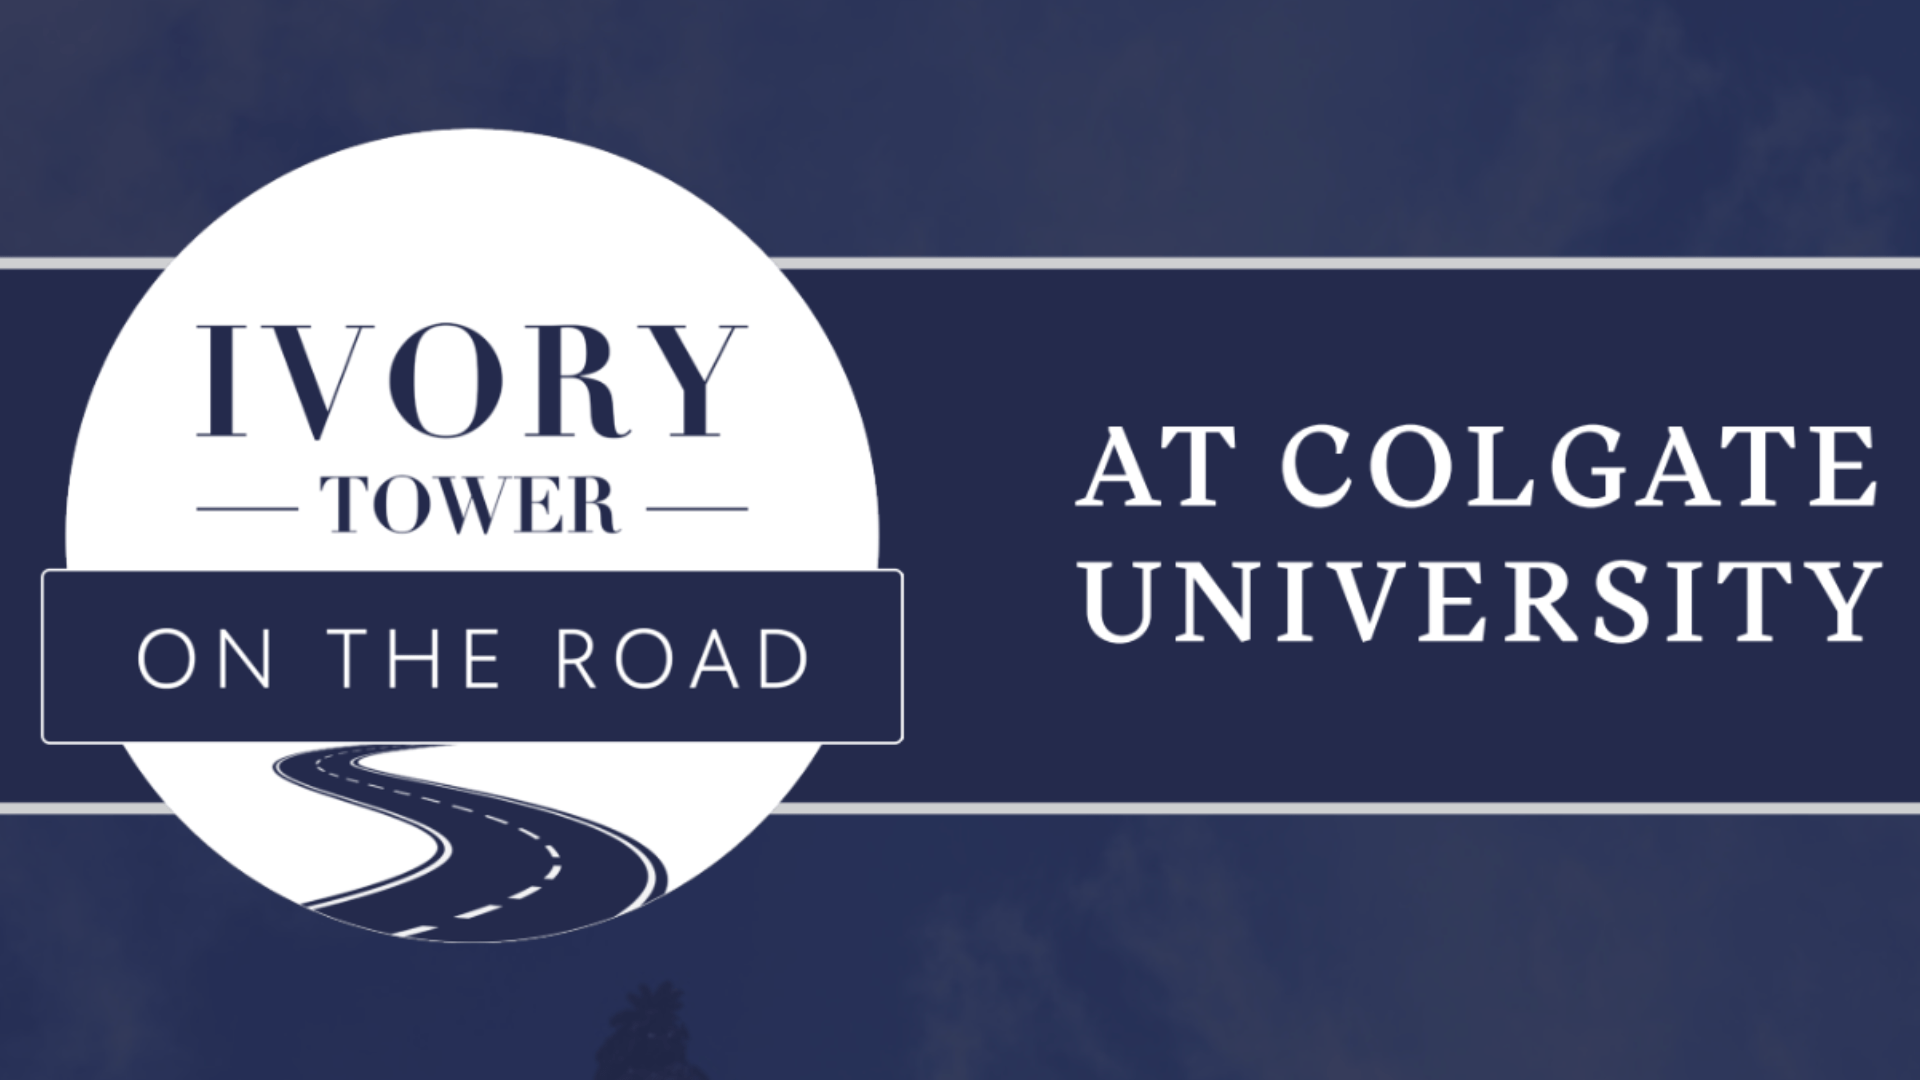 Ivory Tower on the Road at Ʒ on blue